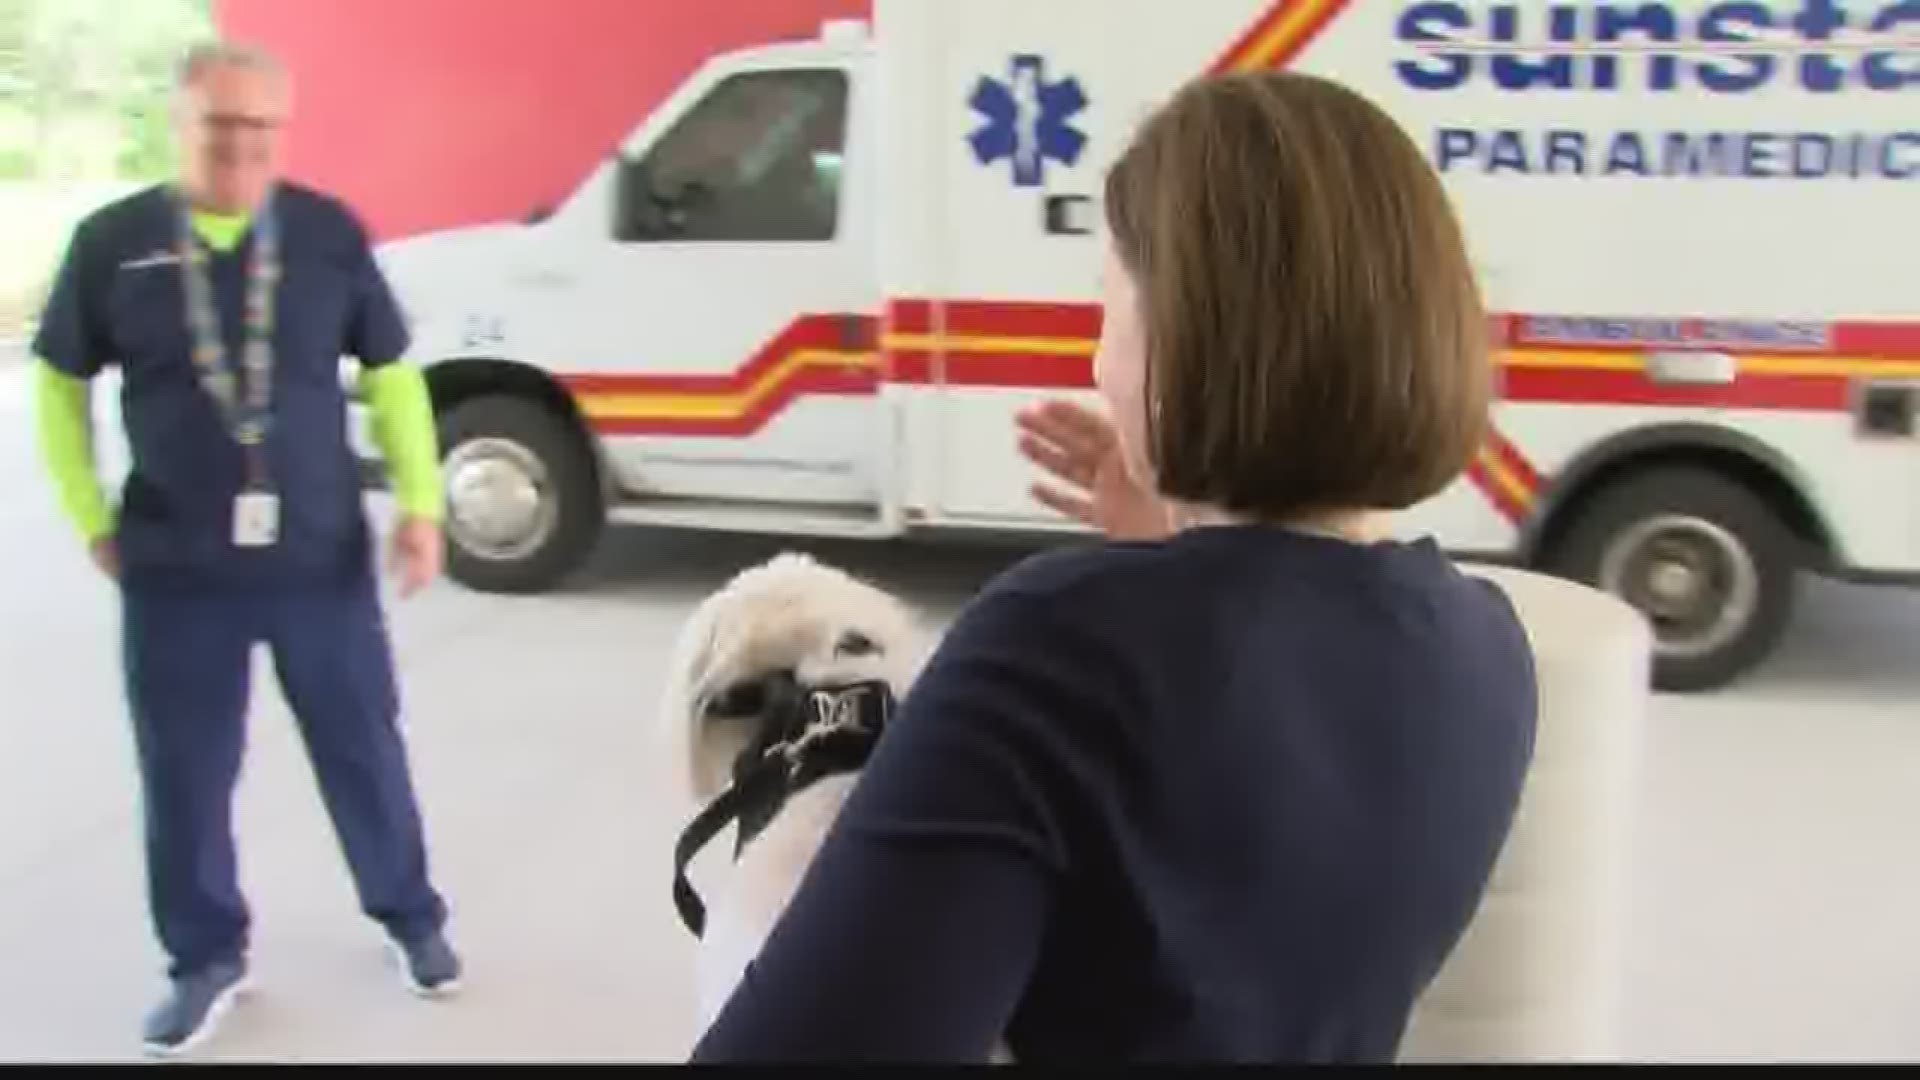 Two weeks ago, a woman and her dog were attacked by three dogs in Oldsmar. She had several bites and so did her dog Casper. She was so overwhelmed by what happened and worried about her dog that she didn't want to get treatment. So, paramedics and the nurses at the hospital decided they would go above the call of duty and made phone calls to the vet about Casper.